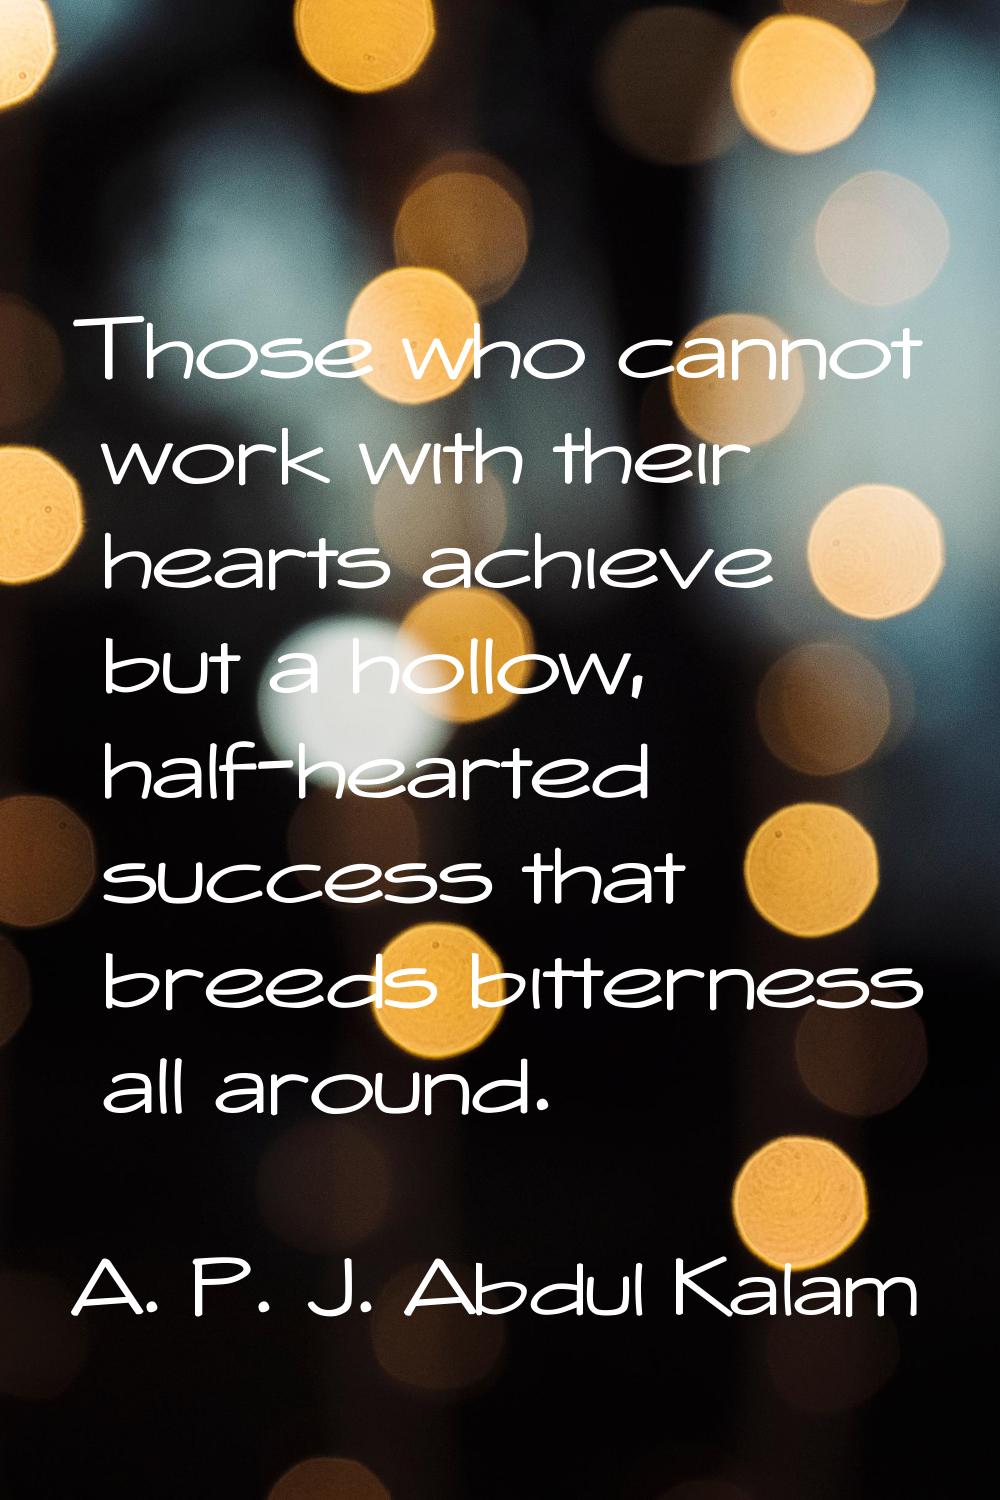 Those who cannot work with their hearts achieve but a hollow, half-hearted success that breeds bitt